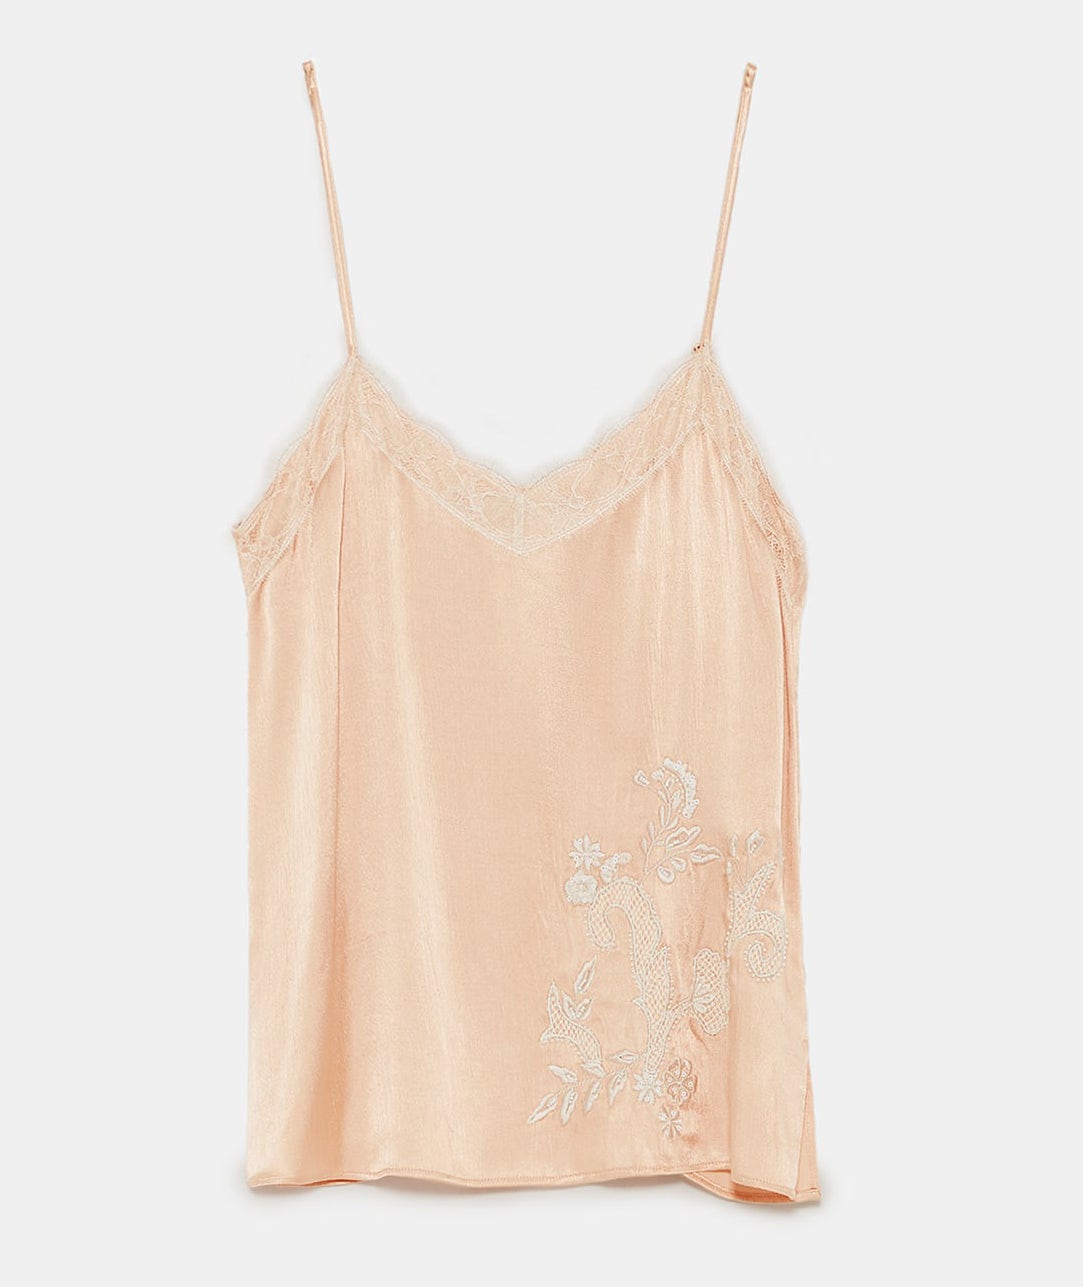 Zara Embroidered Camisole Top in Nude Pink